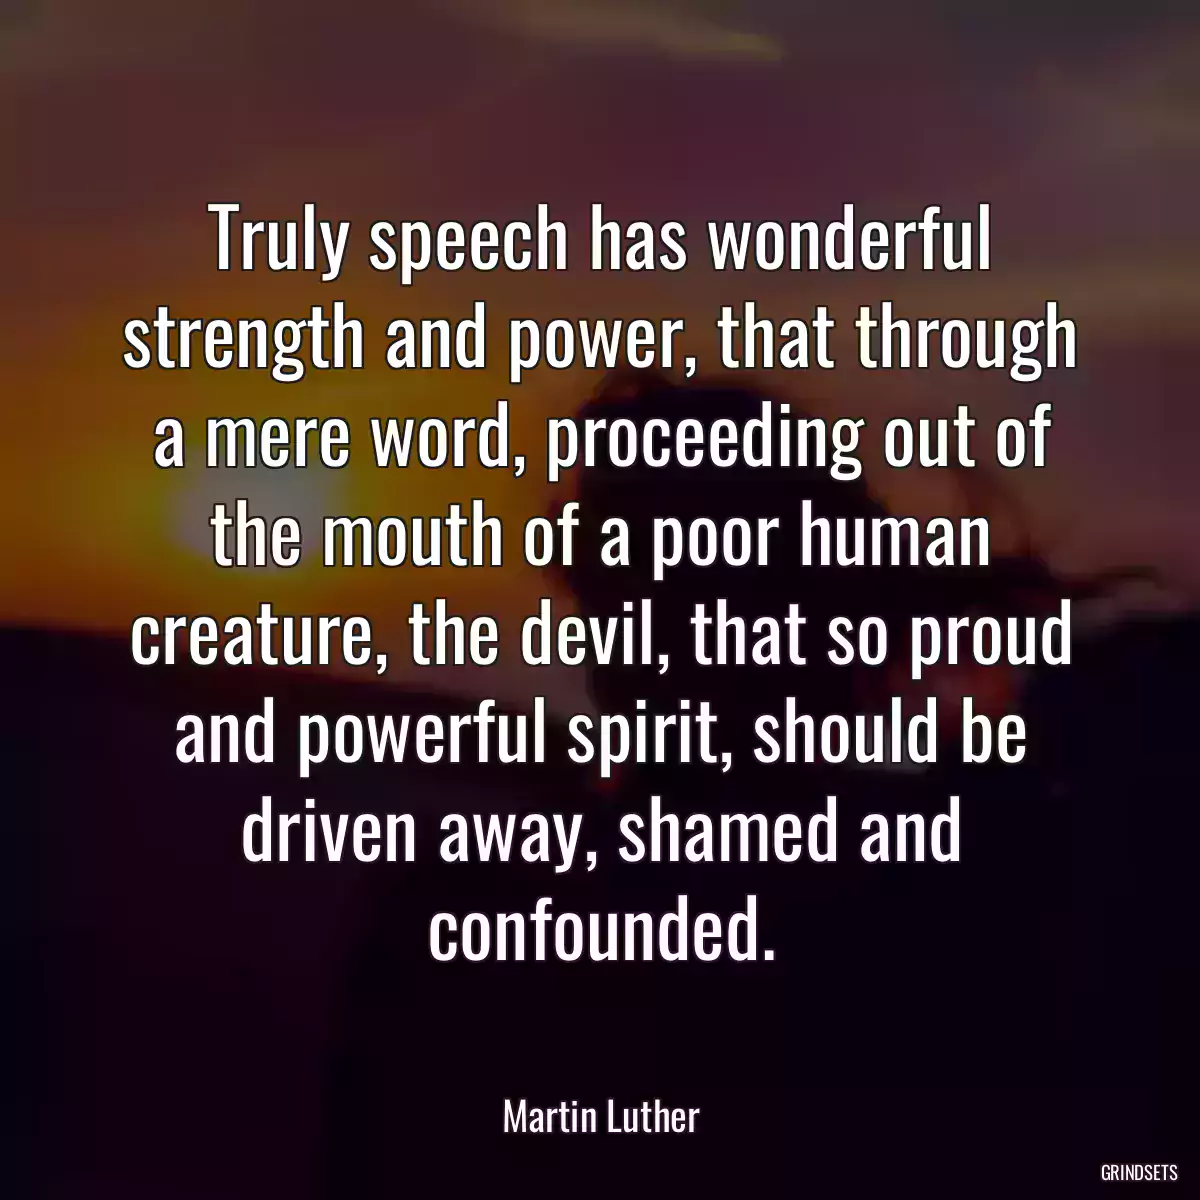 Truly speech has wonderful strength and power, that through a mere word, proceeding out of the mouth of a poor human creature, the devil, that so proud and powerful spirit, should be driven away, shamed and confounded.